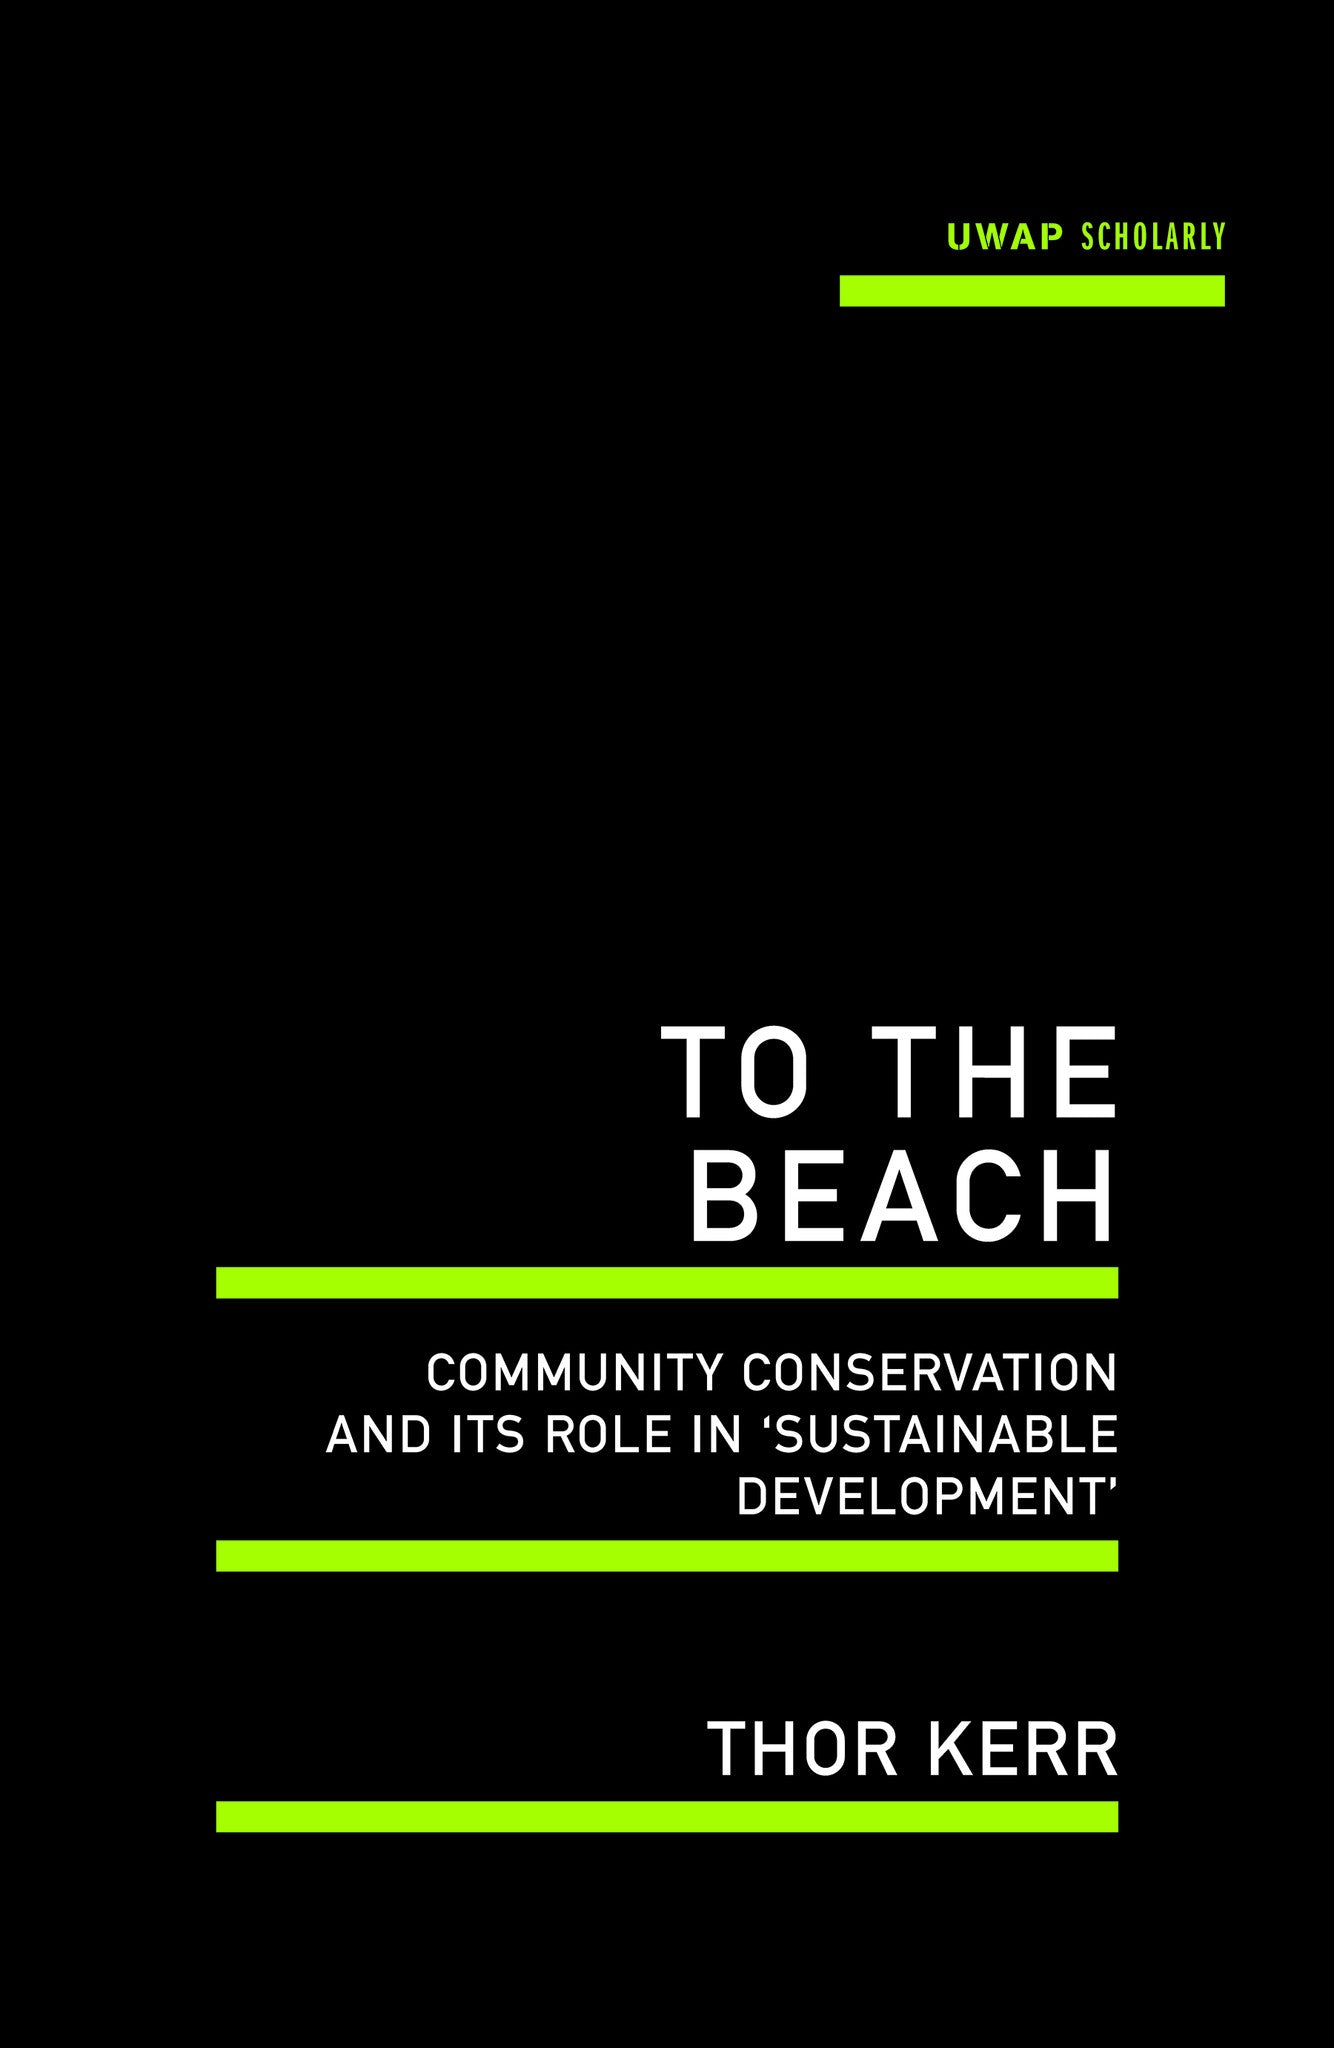 To the Beach: Community conservation and its role in 'sustainable development'